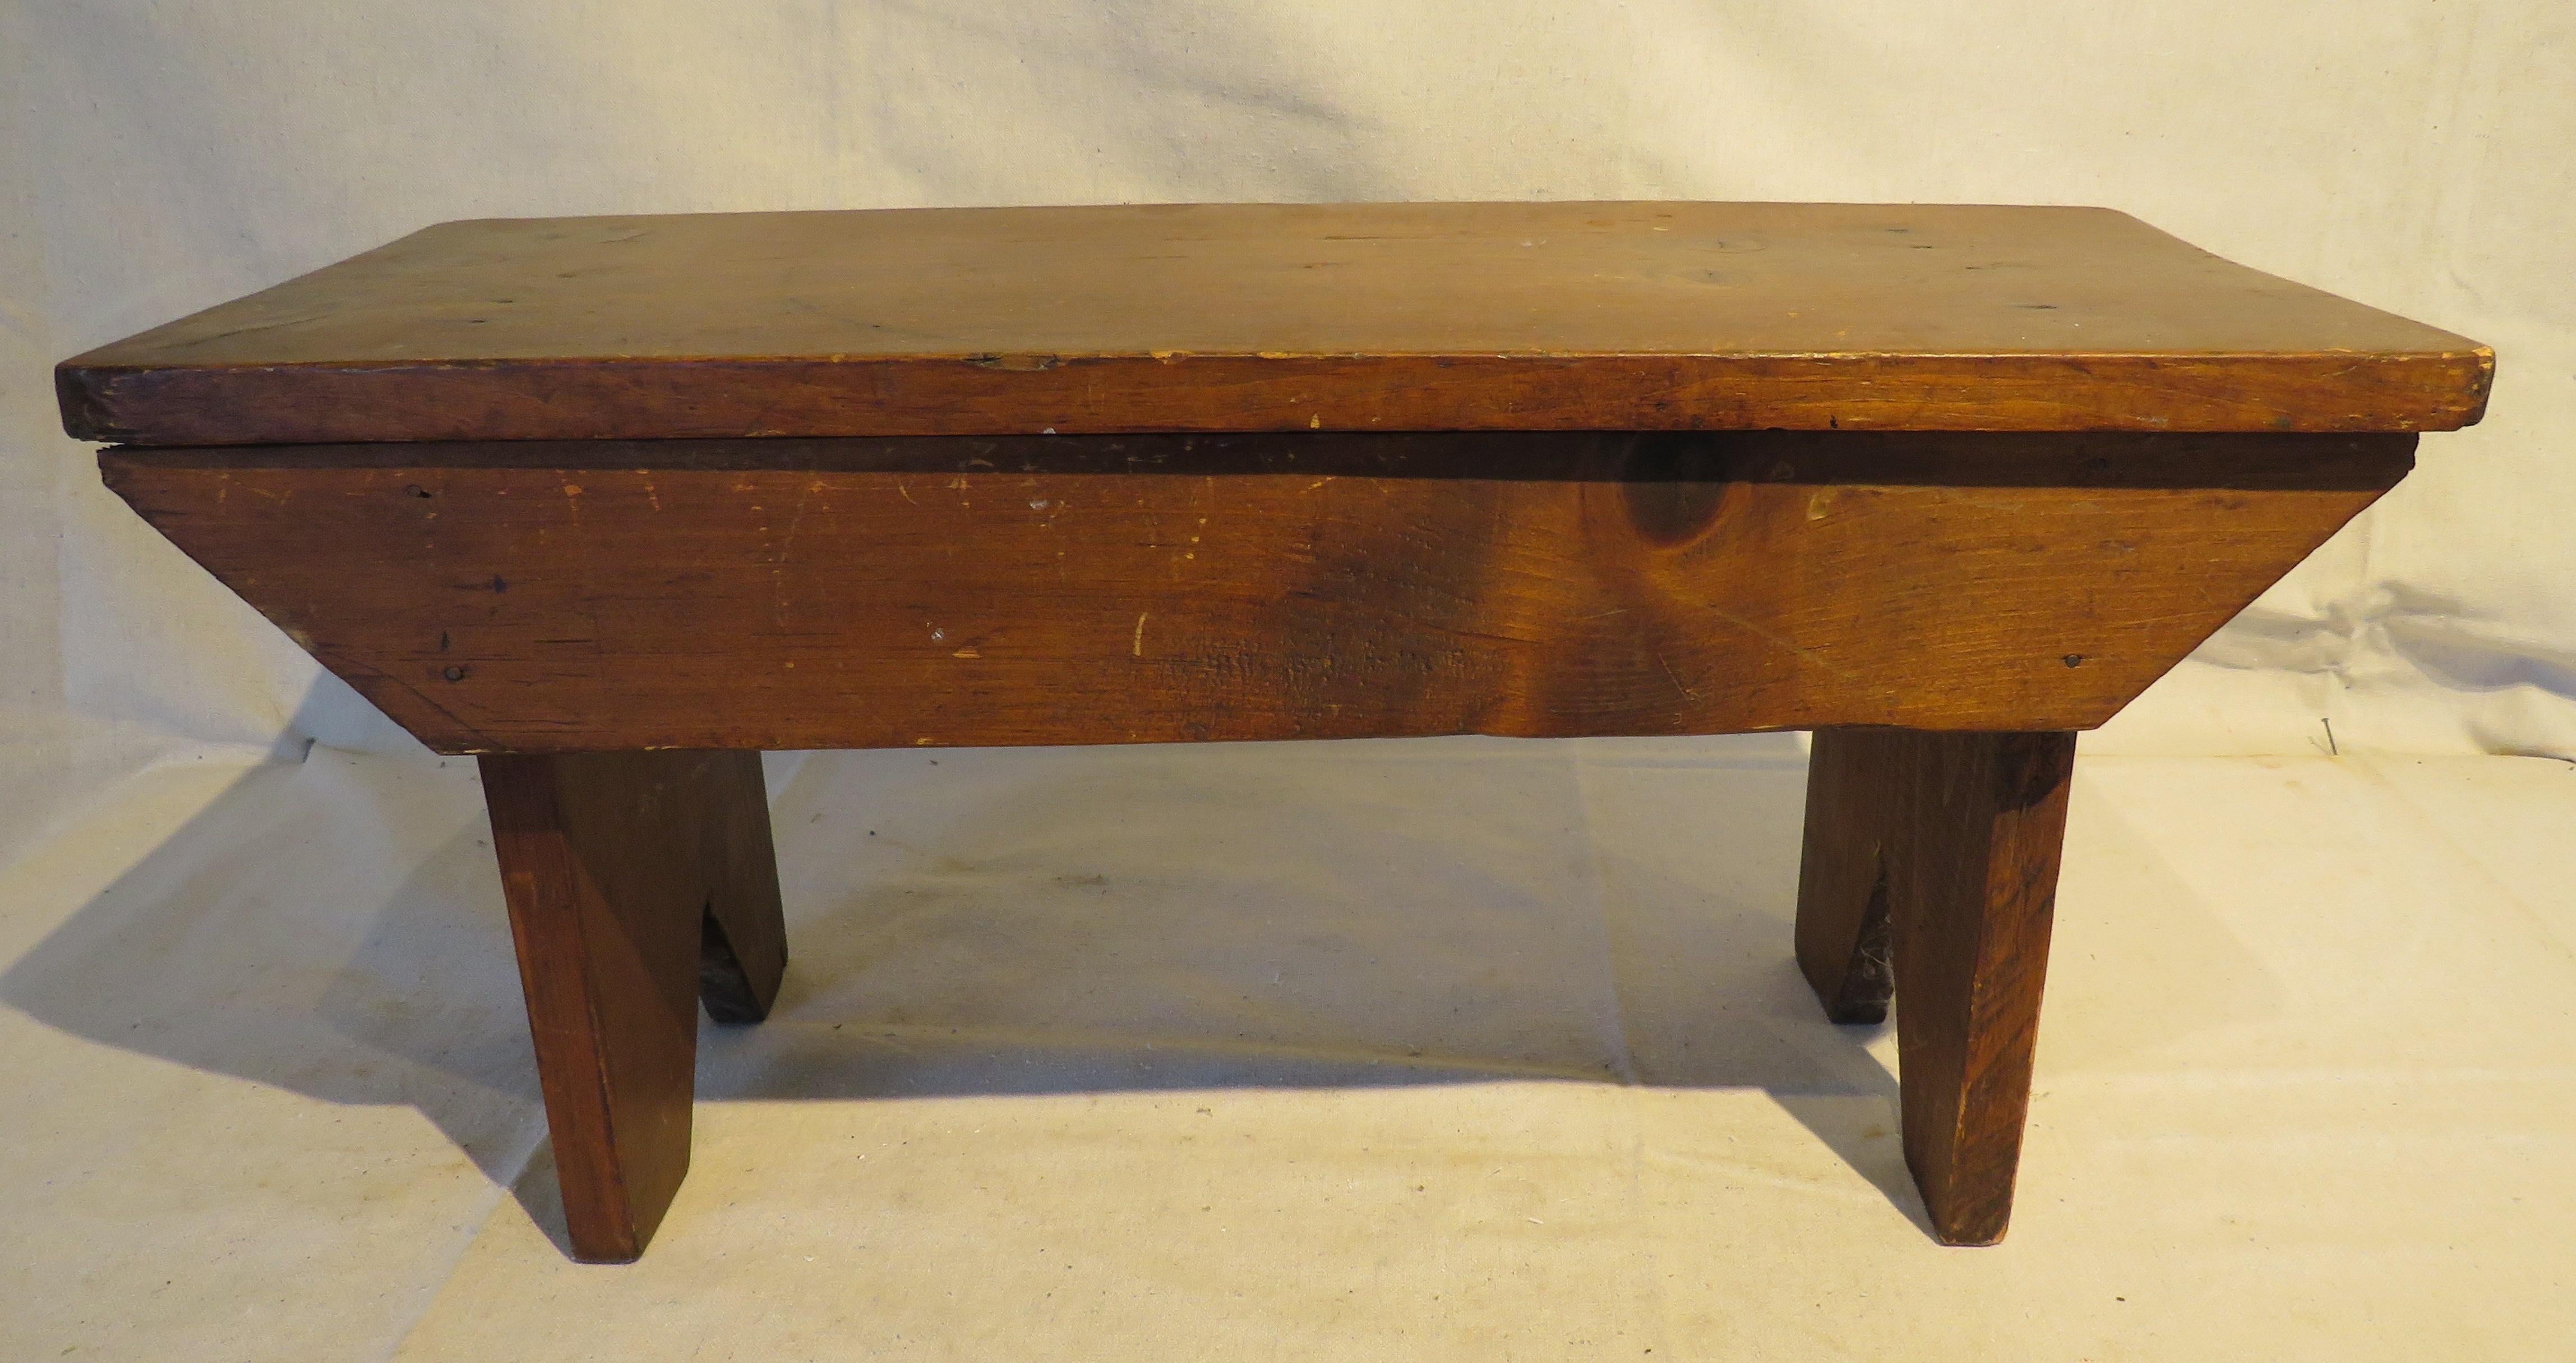 Vintage pine stool with classic, rustic design.